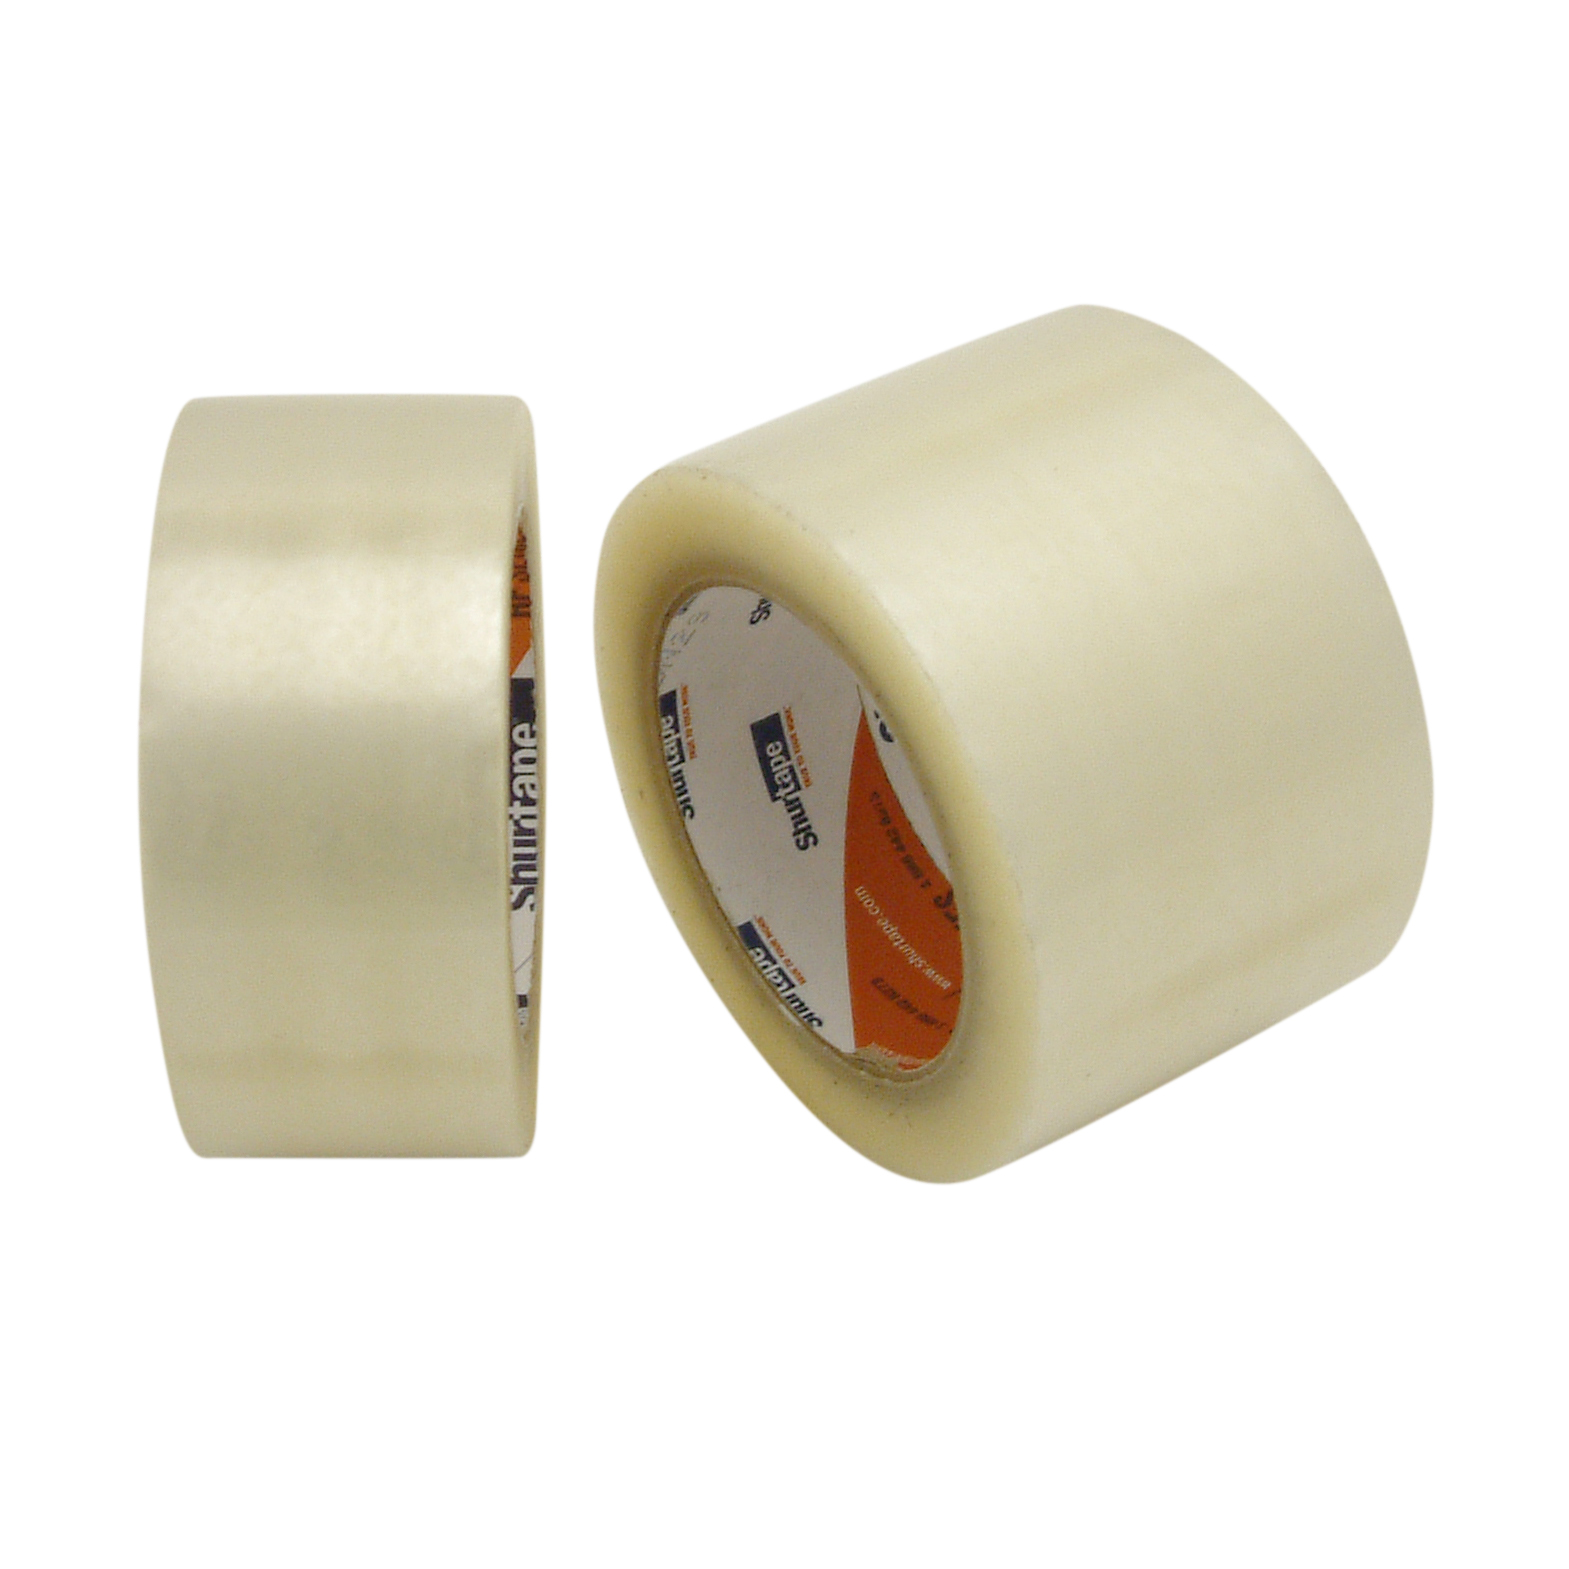 Shurtape HP-232 Cold Temperature Performance Packaging Tape